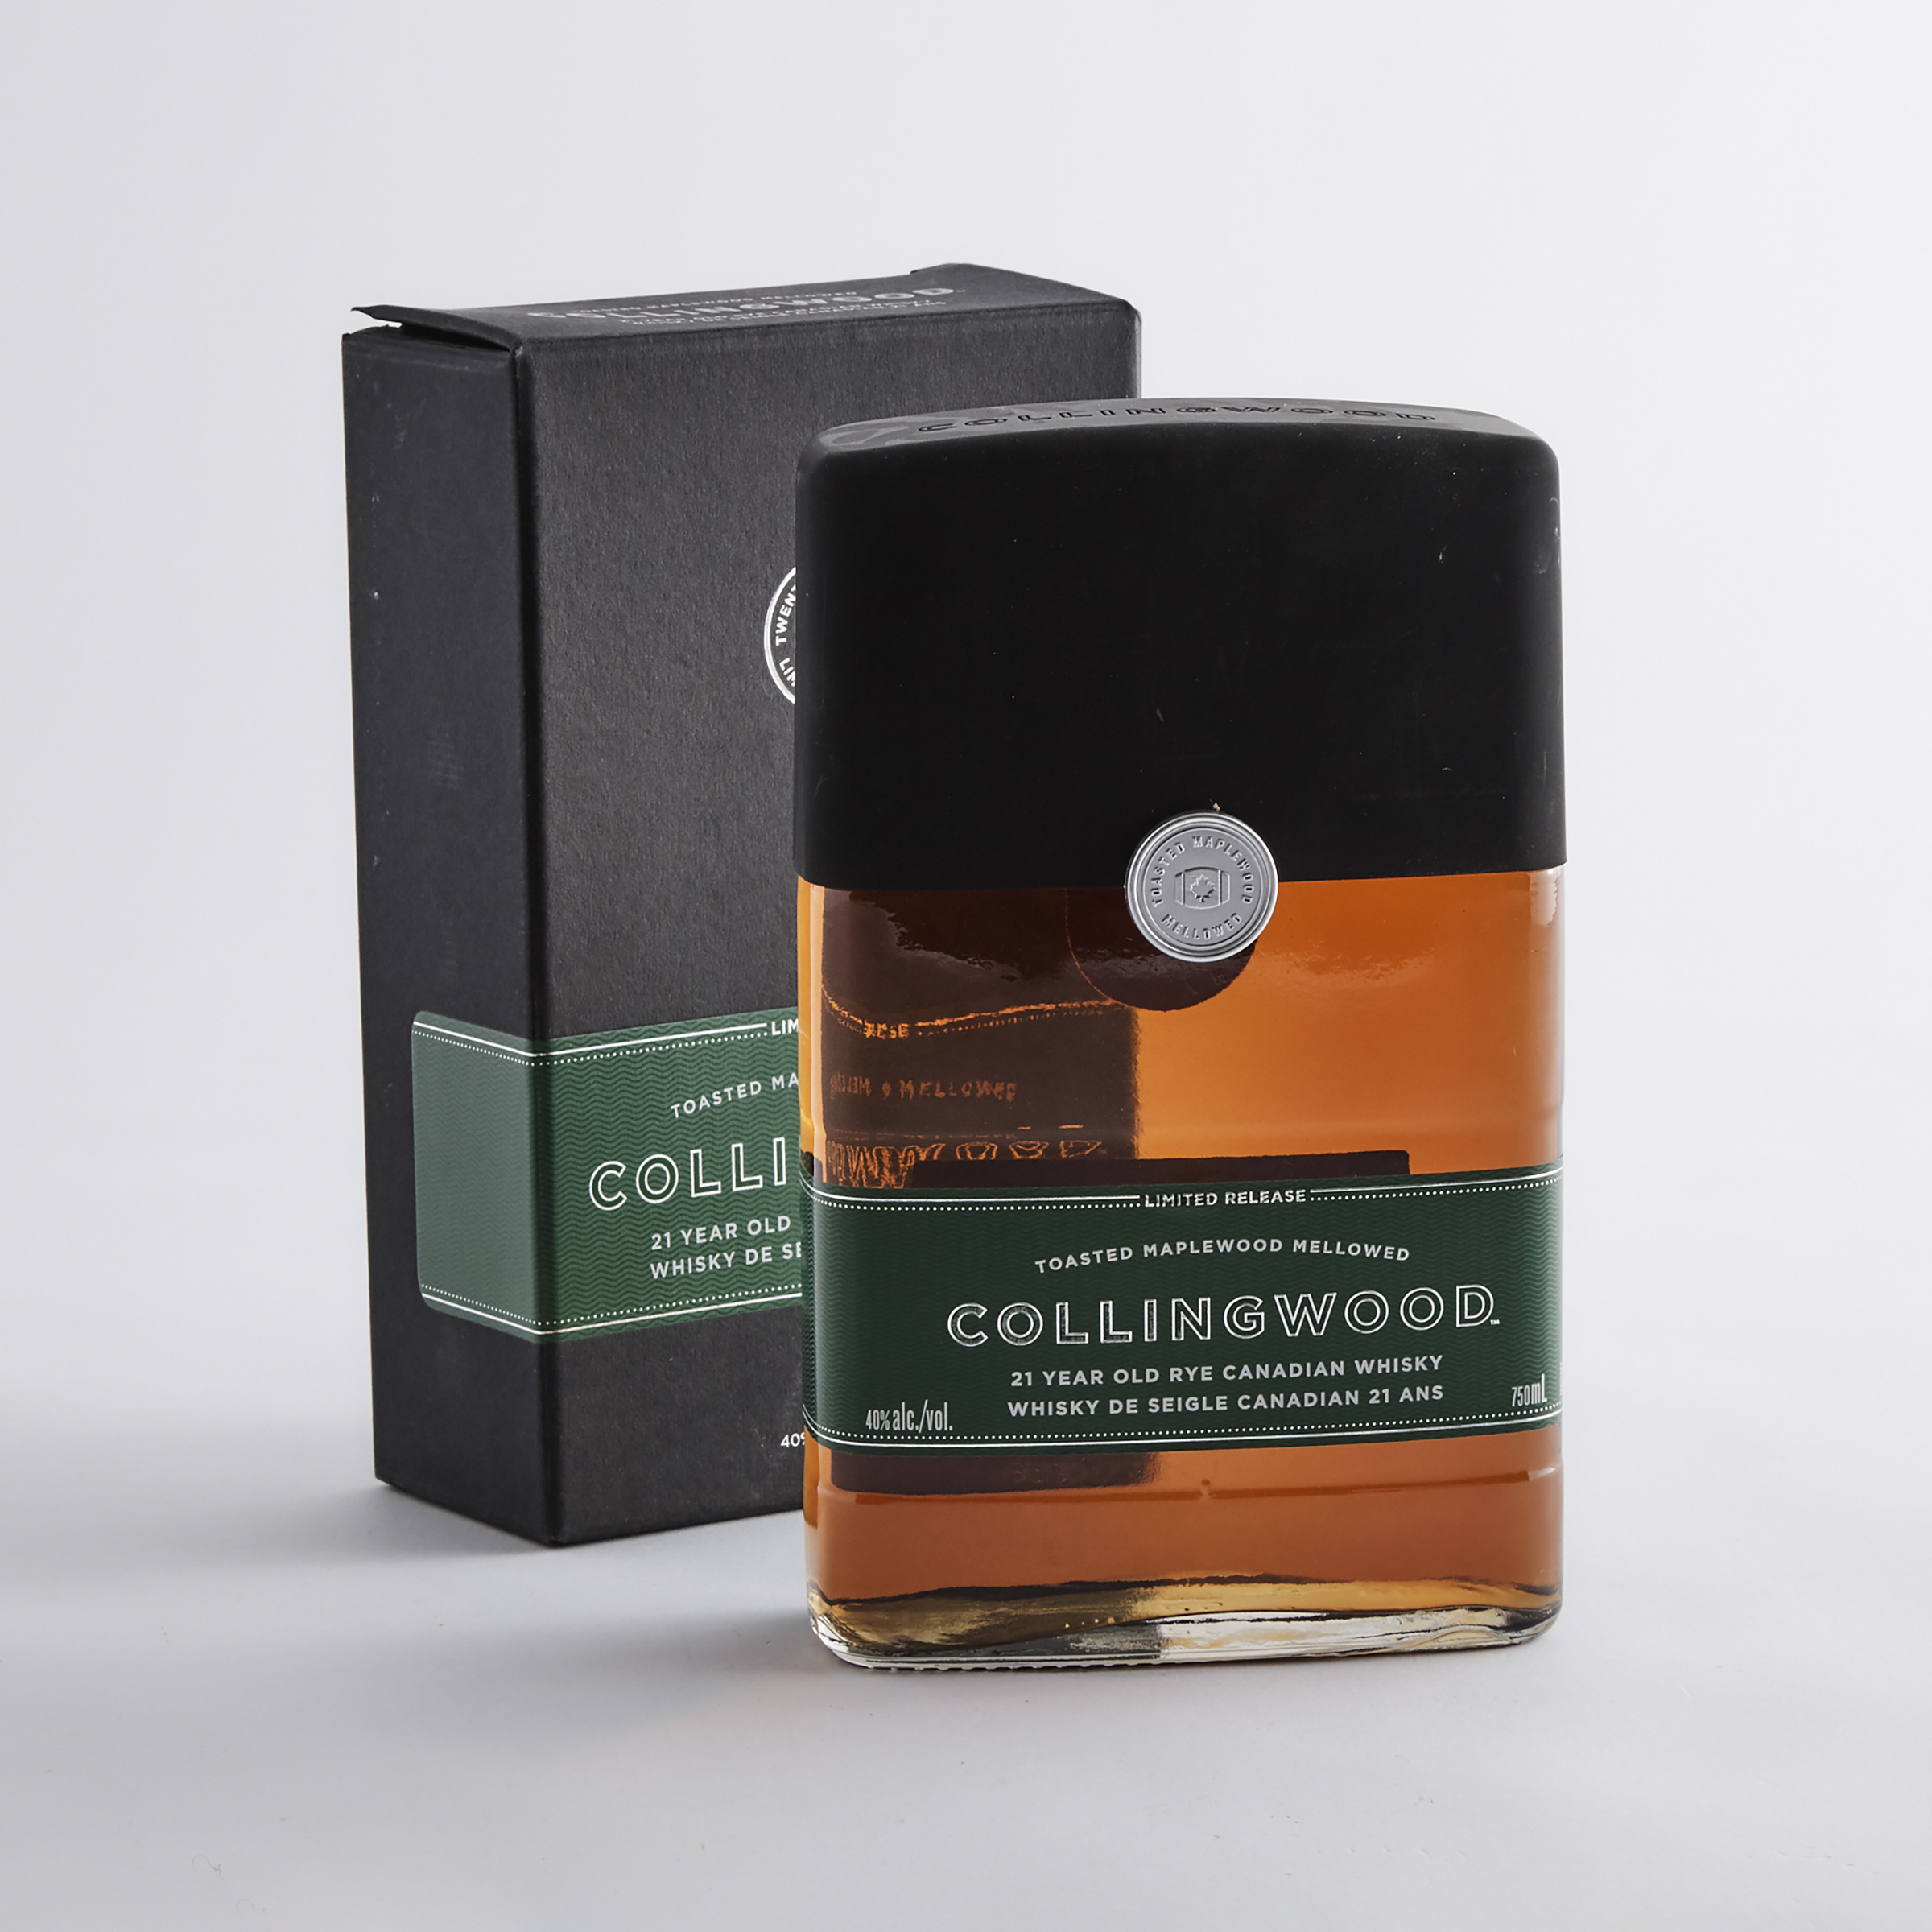 COLLINGWOOD CANADIAN RYE WHISKY 21 YEARS (ONE 750 ML)